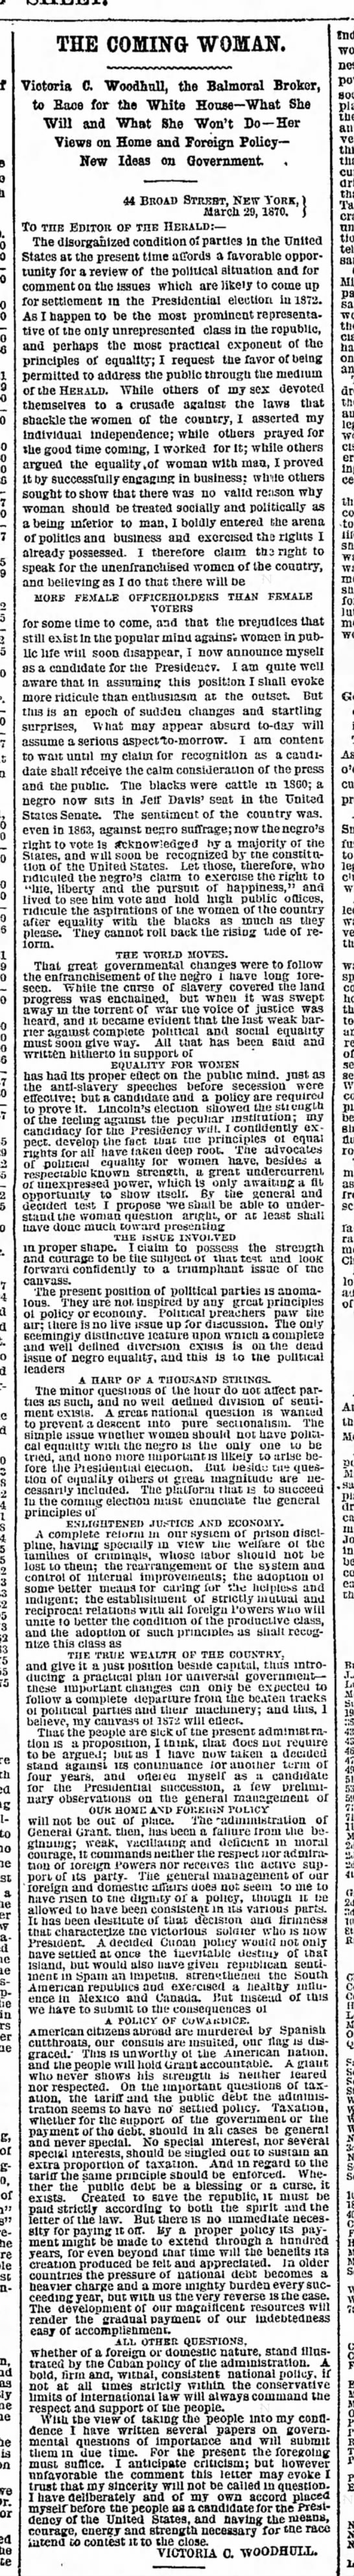 Victoria Woodhull announces her candidacy on Apr. 2, 1870 in the New York Herald - 